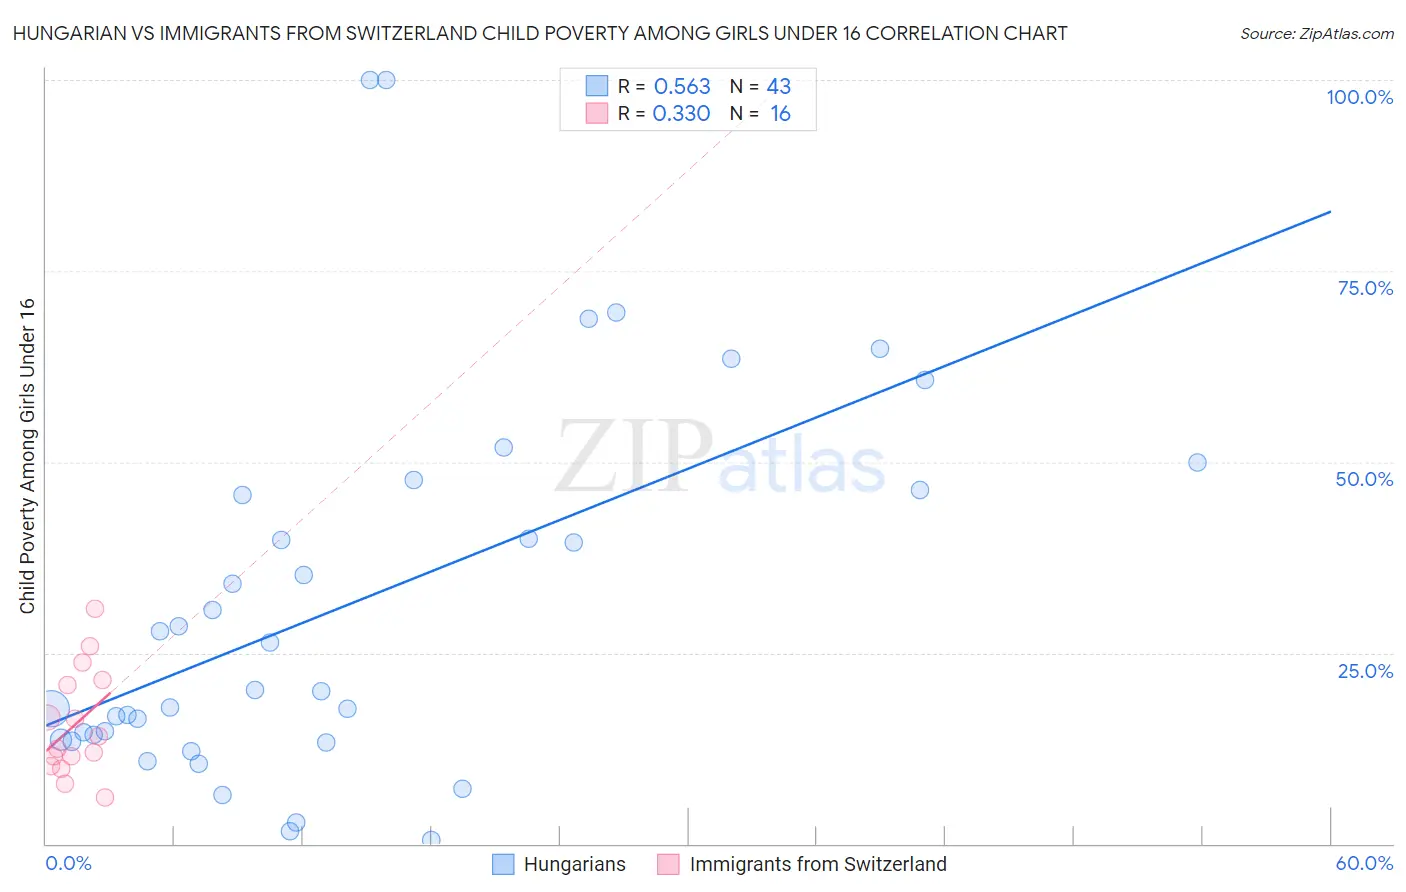 Hungarian vs Immigrants from Switzerland Child Poverty Among Girls Under 16